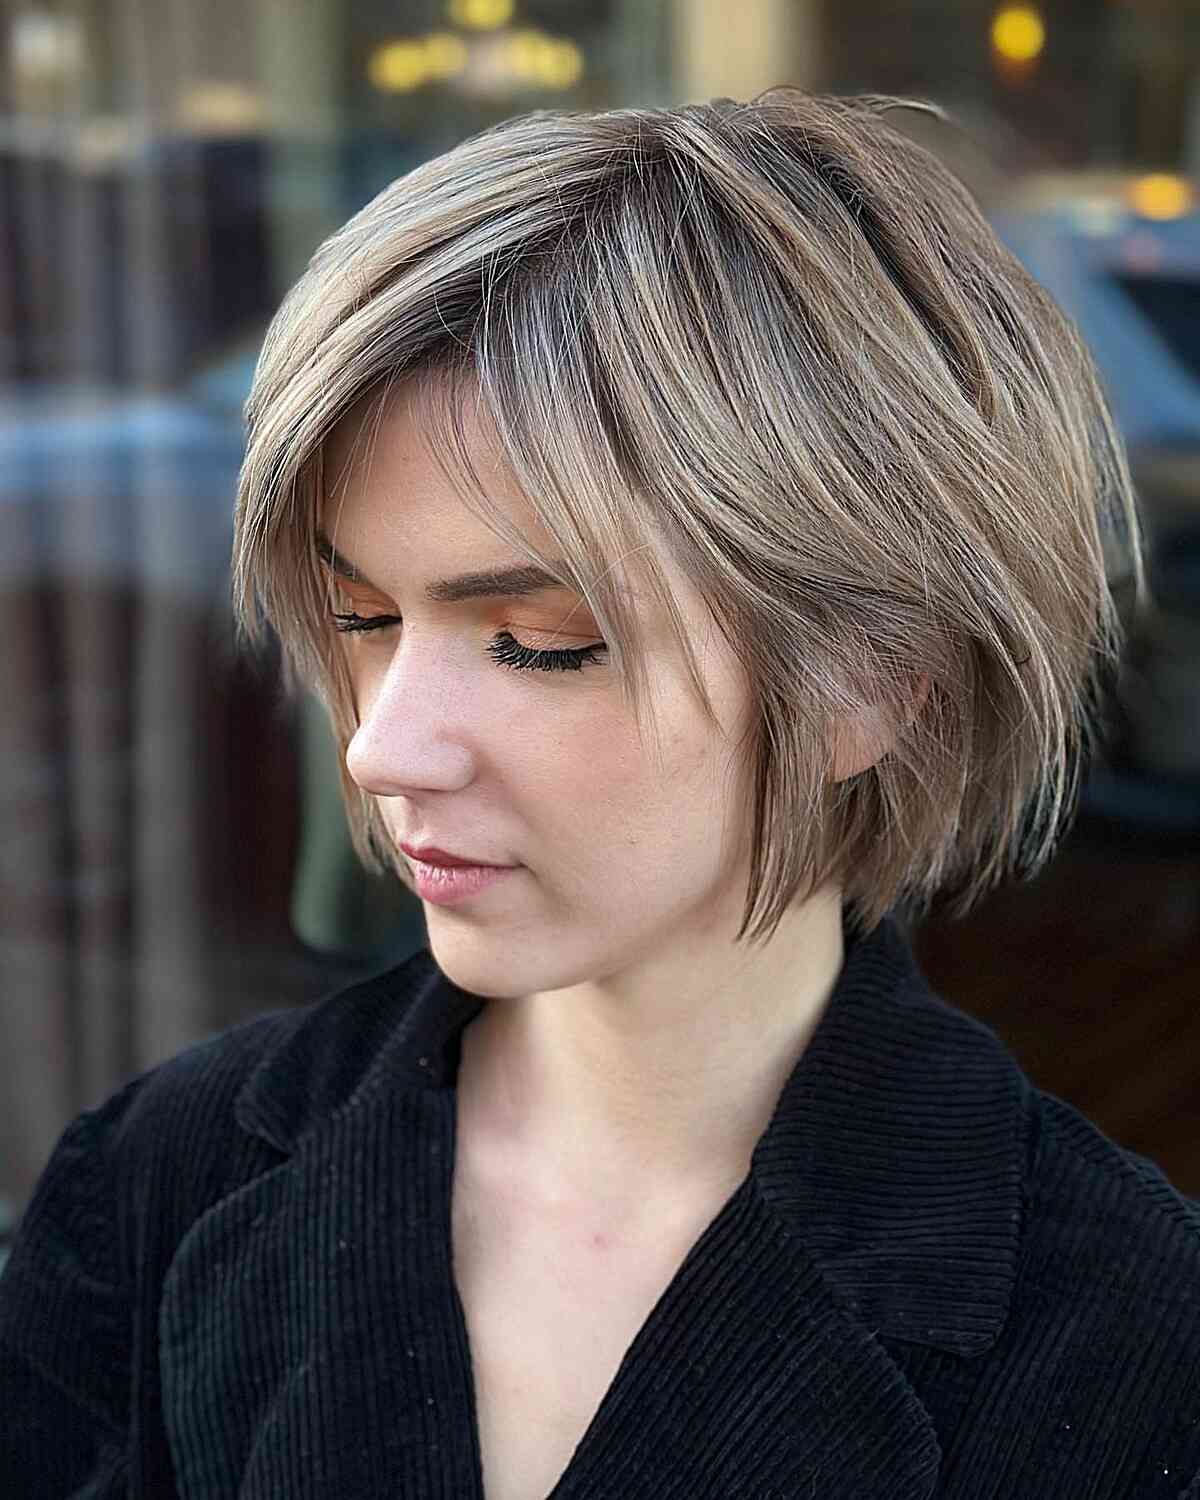 How To Choose The Best Short Hairstyle For Your Face